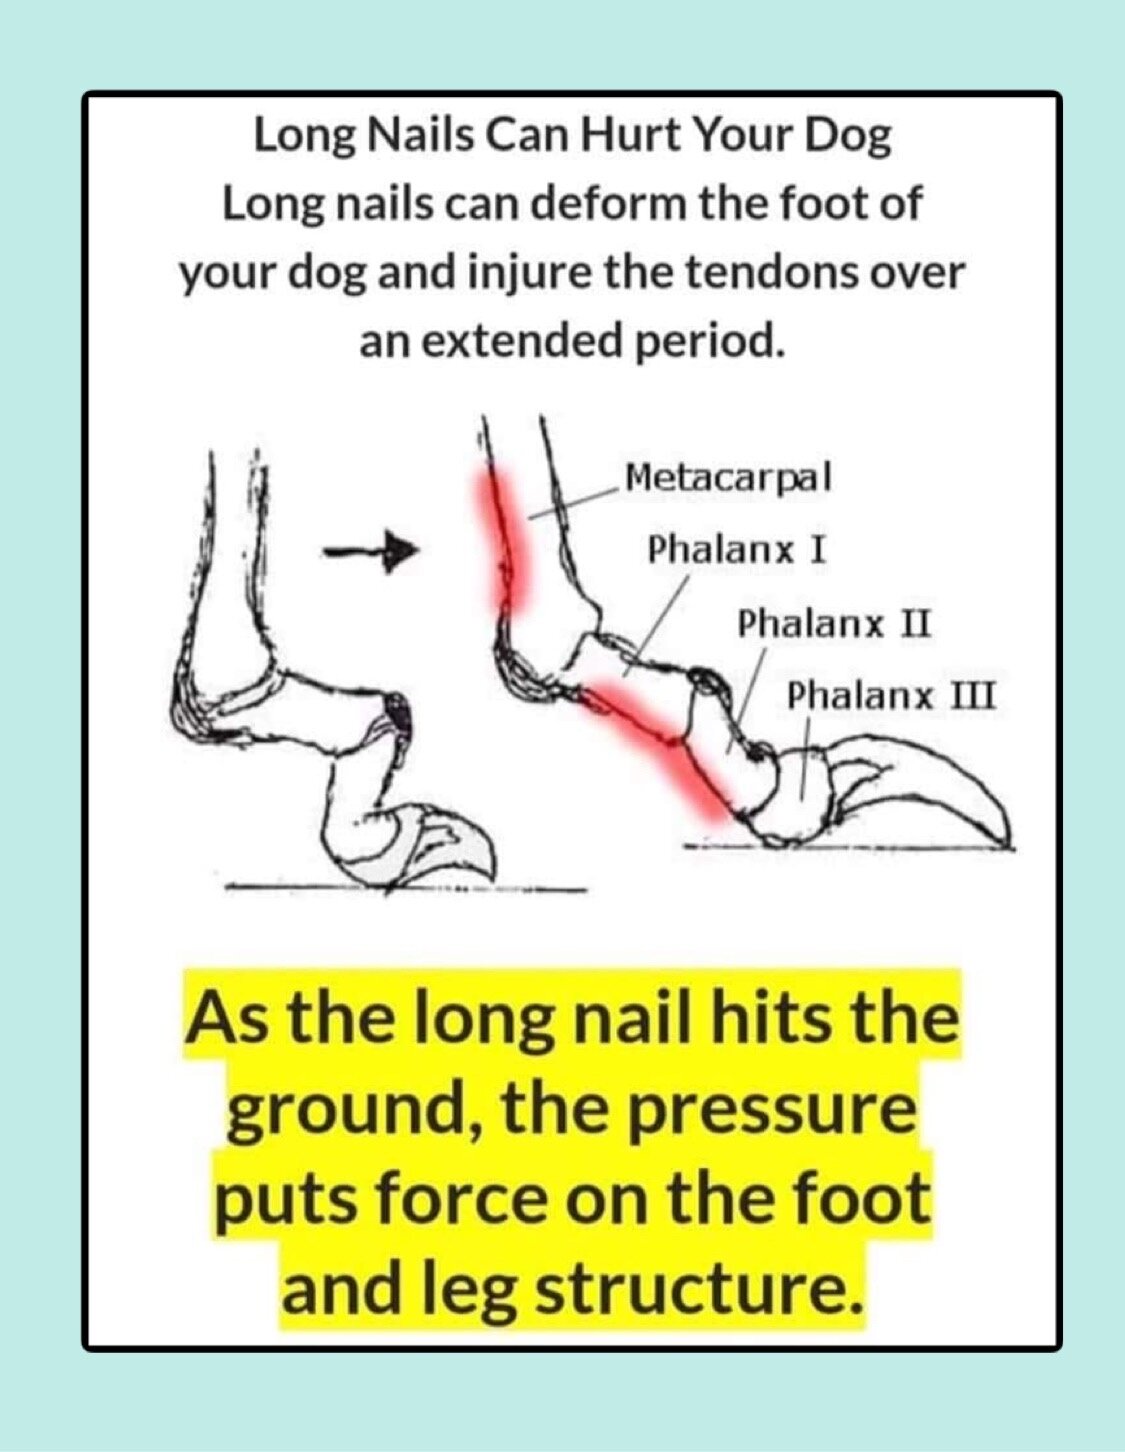 why nail trimming is important